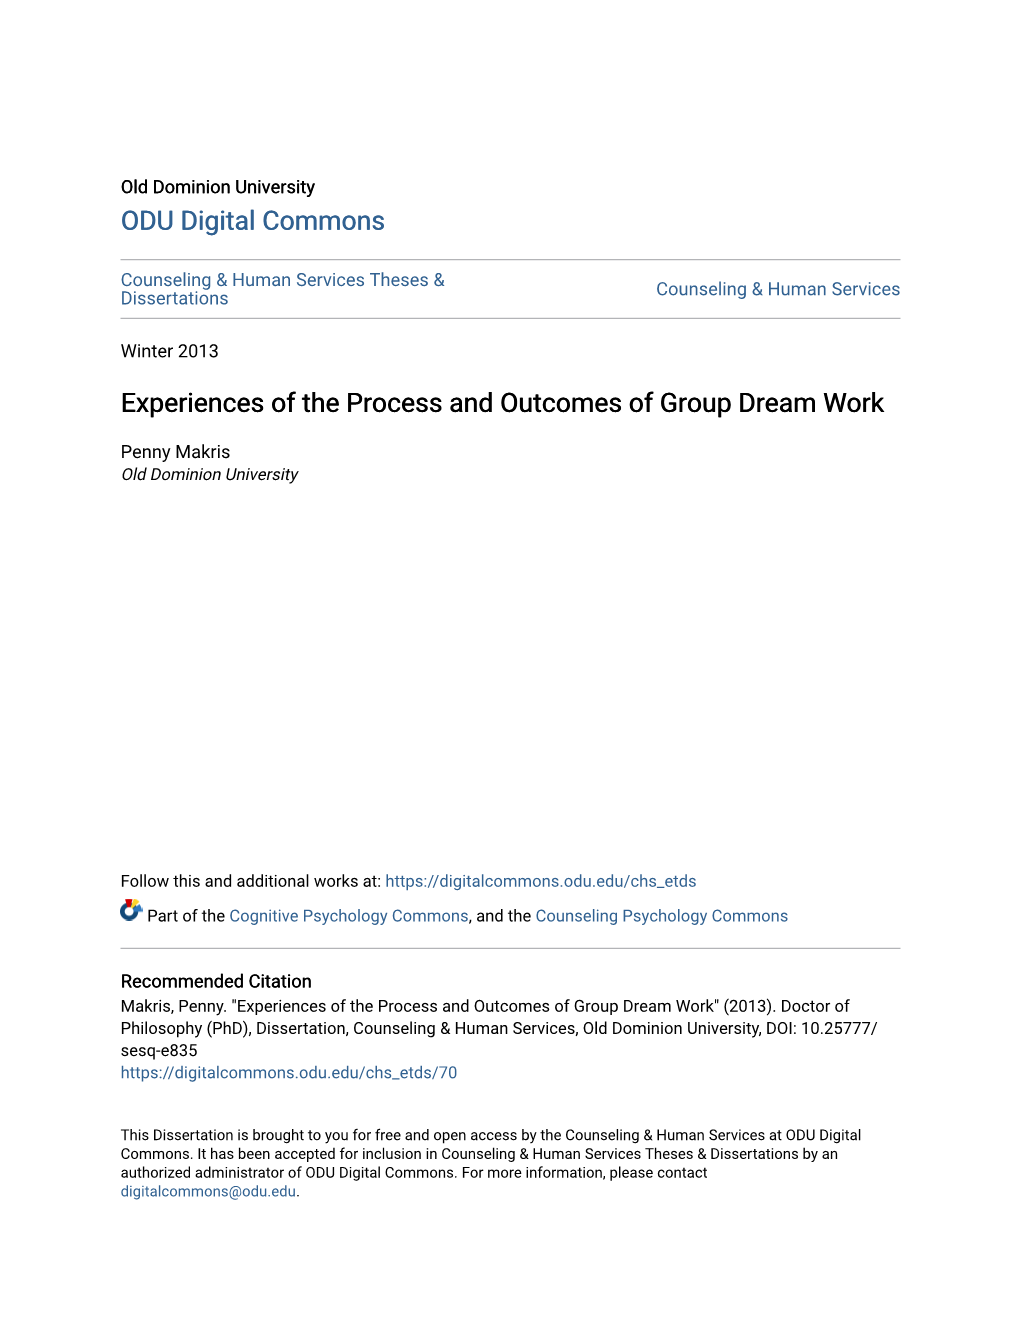 Experiences of the Process and Outcomes of Group Dream Work